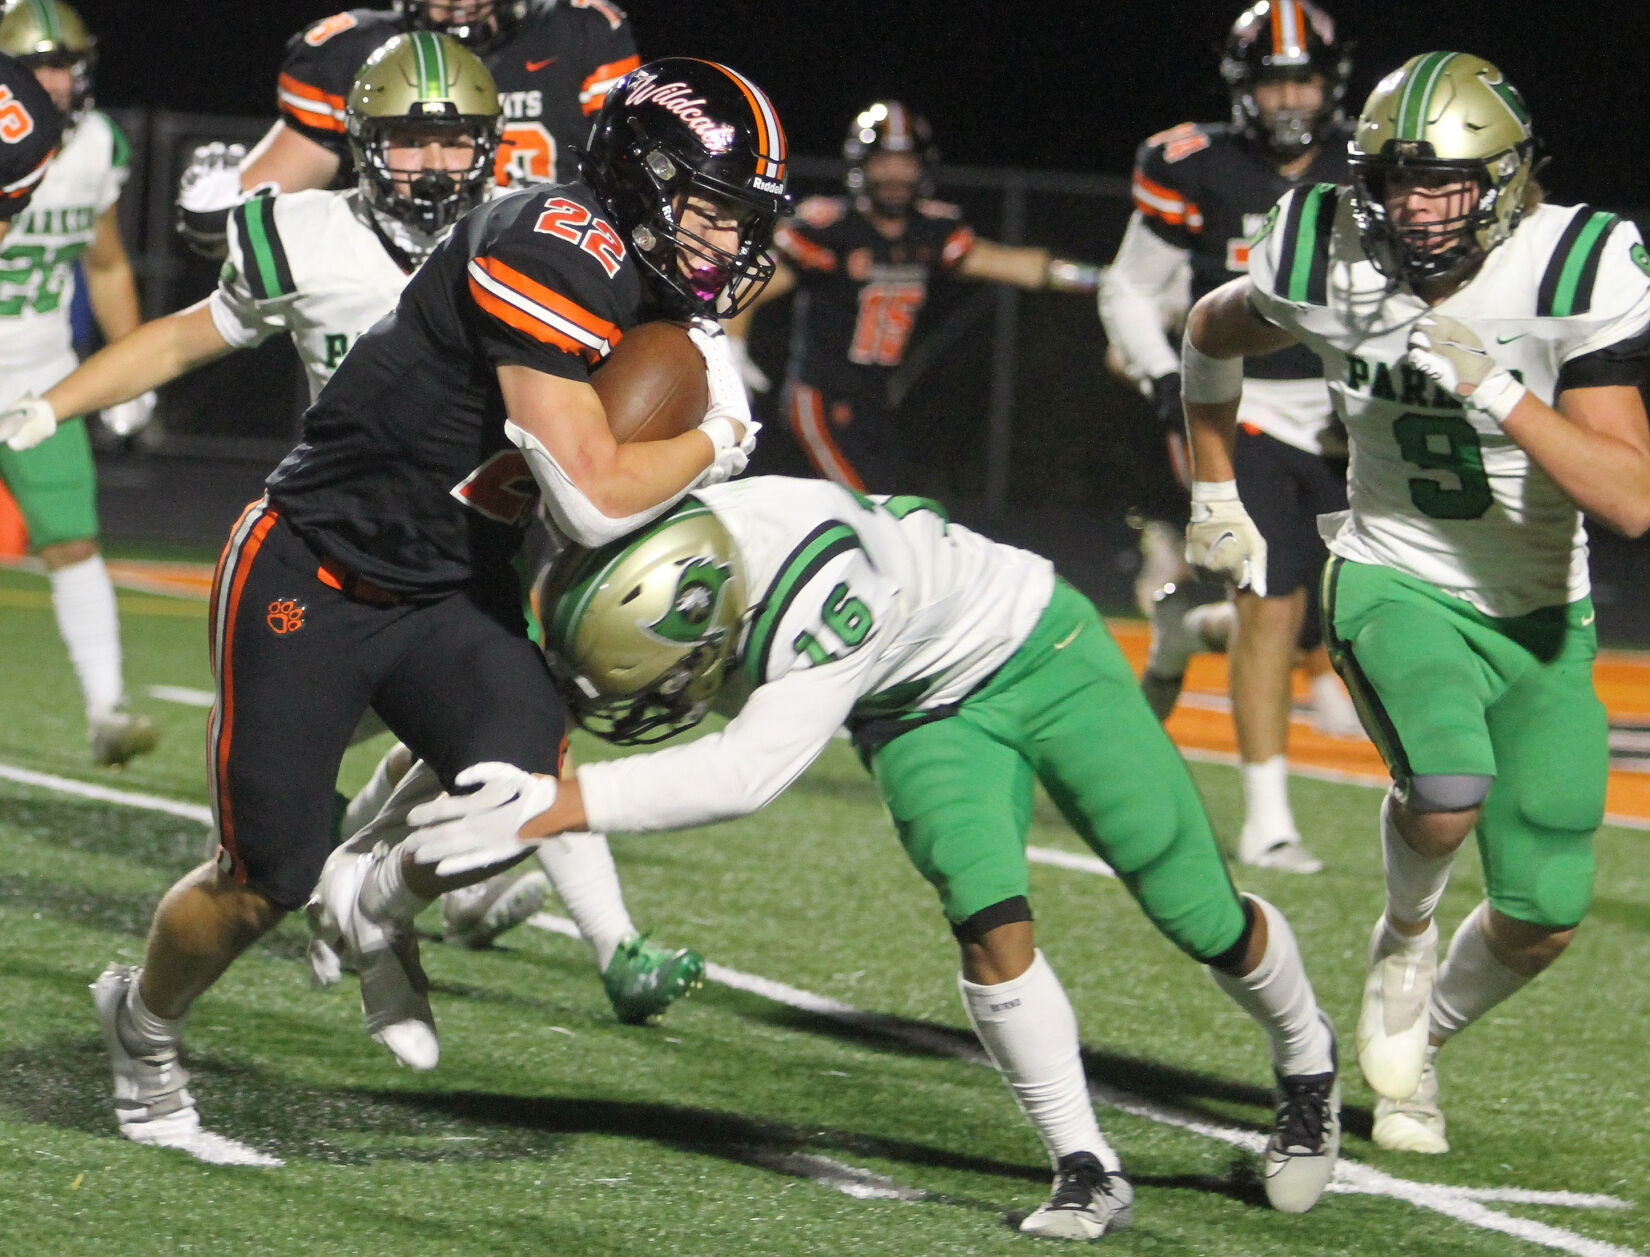 Verona’s Senior Quarterback Leads Team to Victory Over Janesville Parker in Clutch Fourth-Down Run